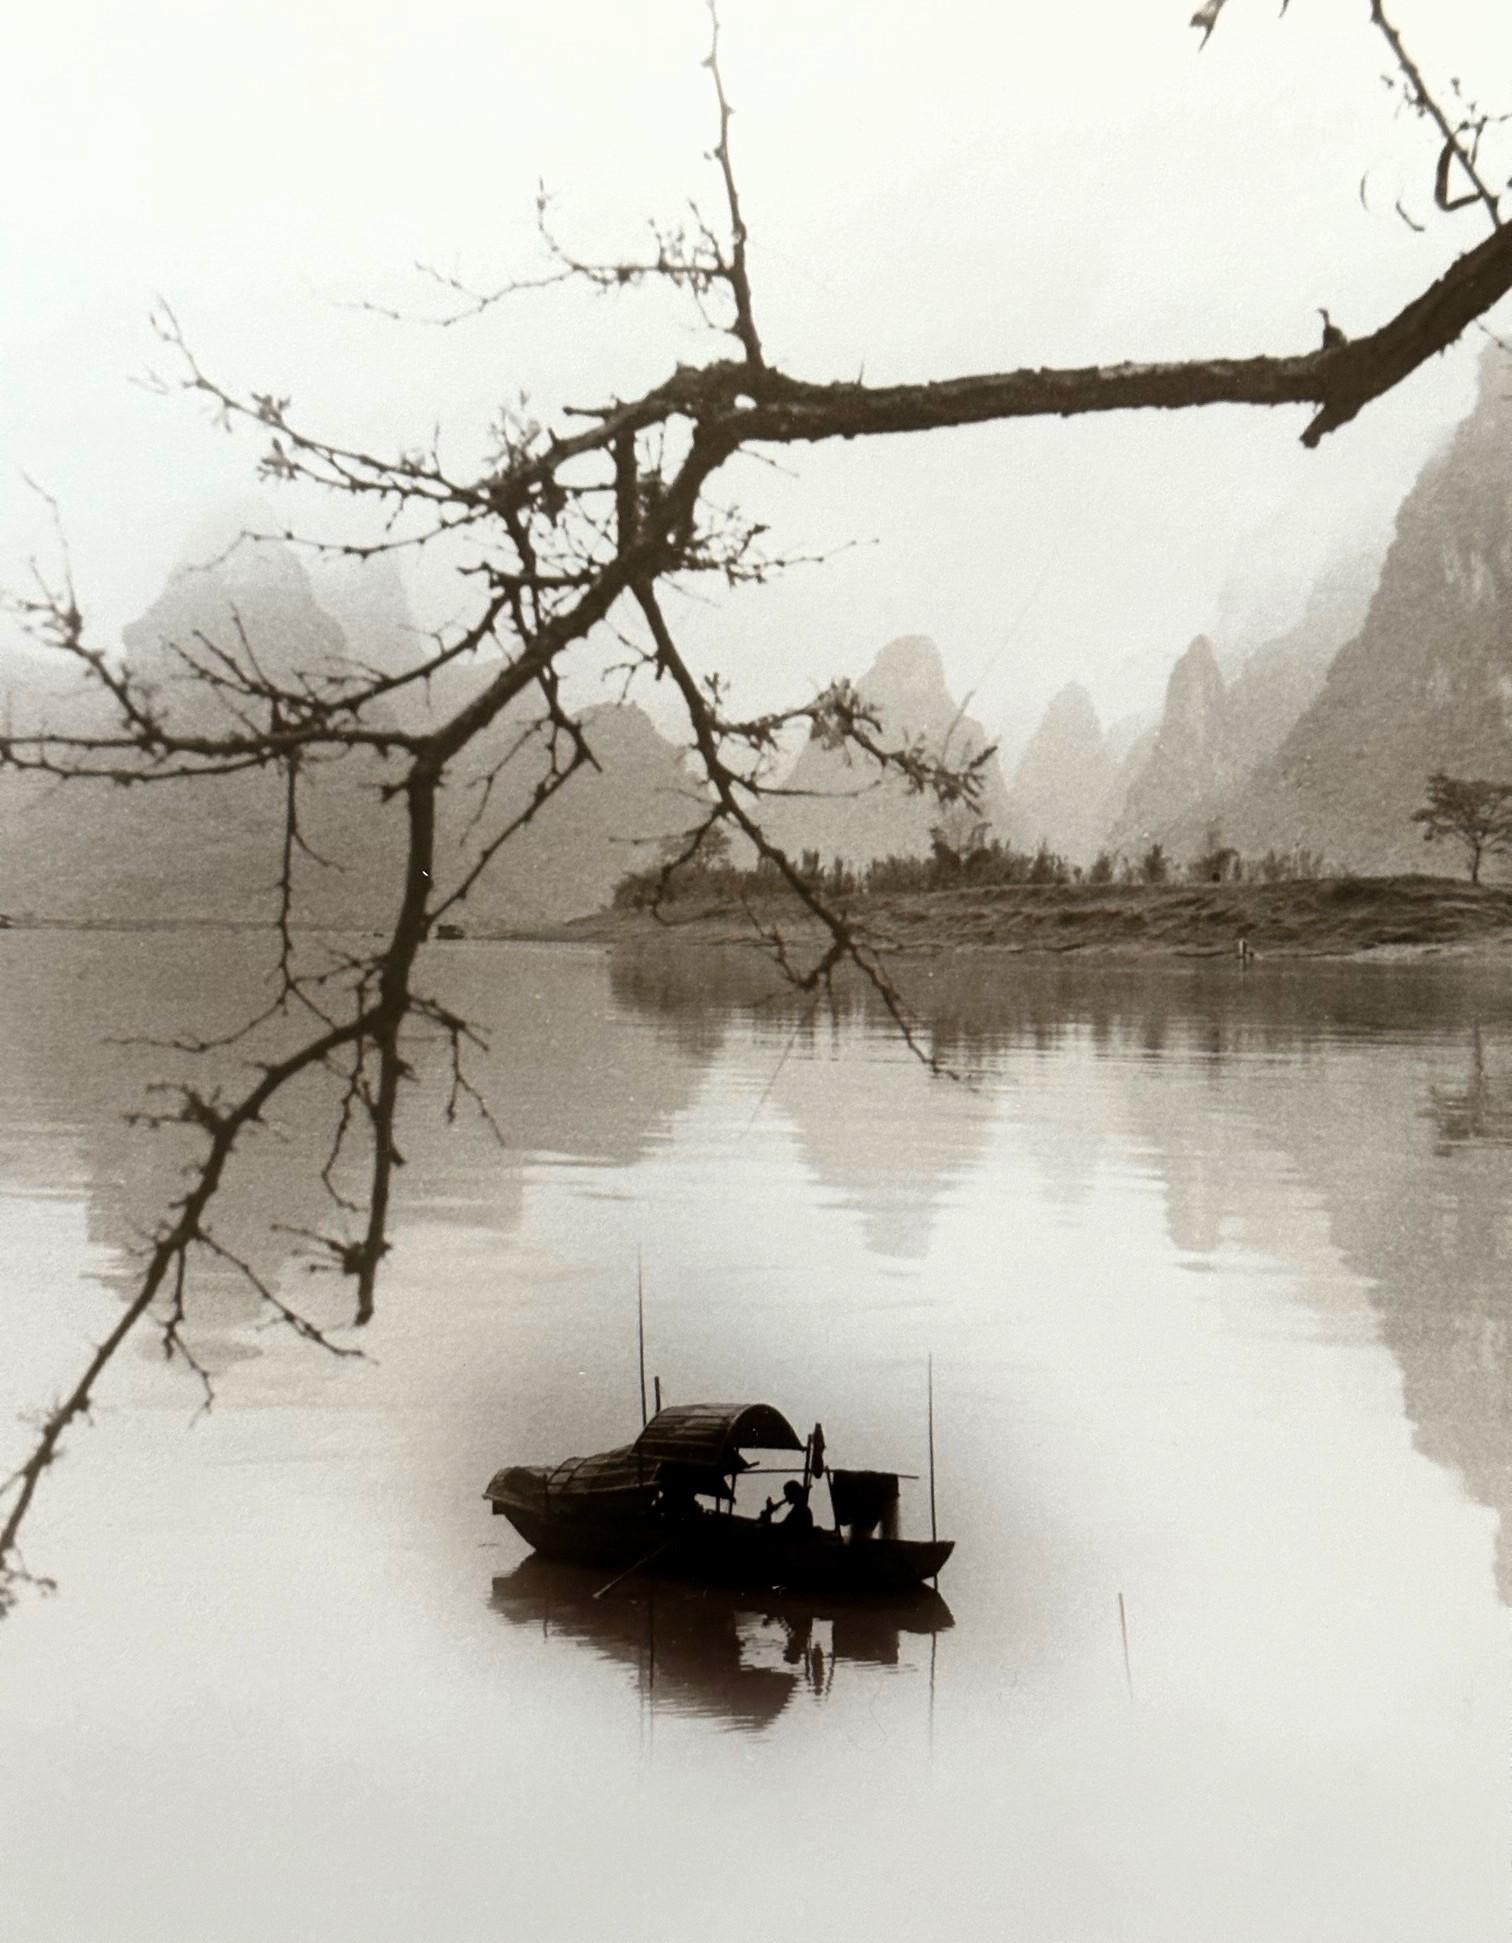 American Framed Landscape Photograph by Don Hong Oai For Sale